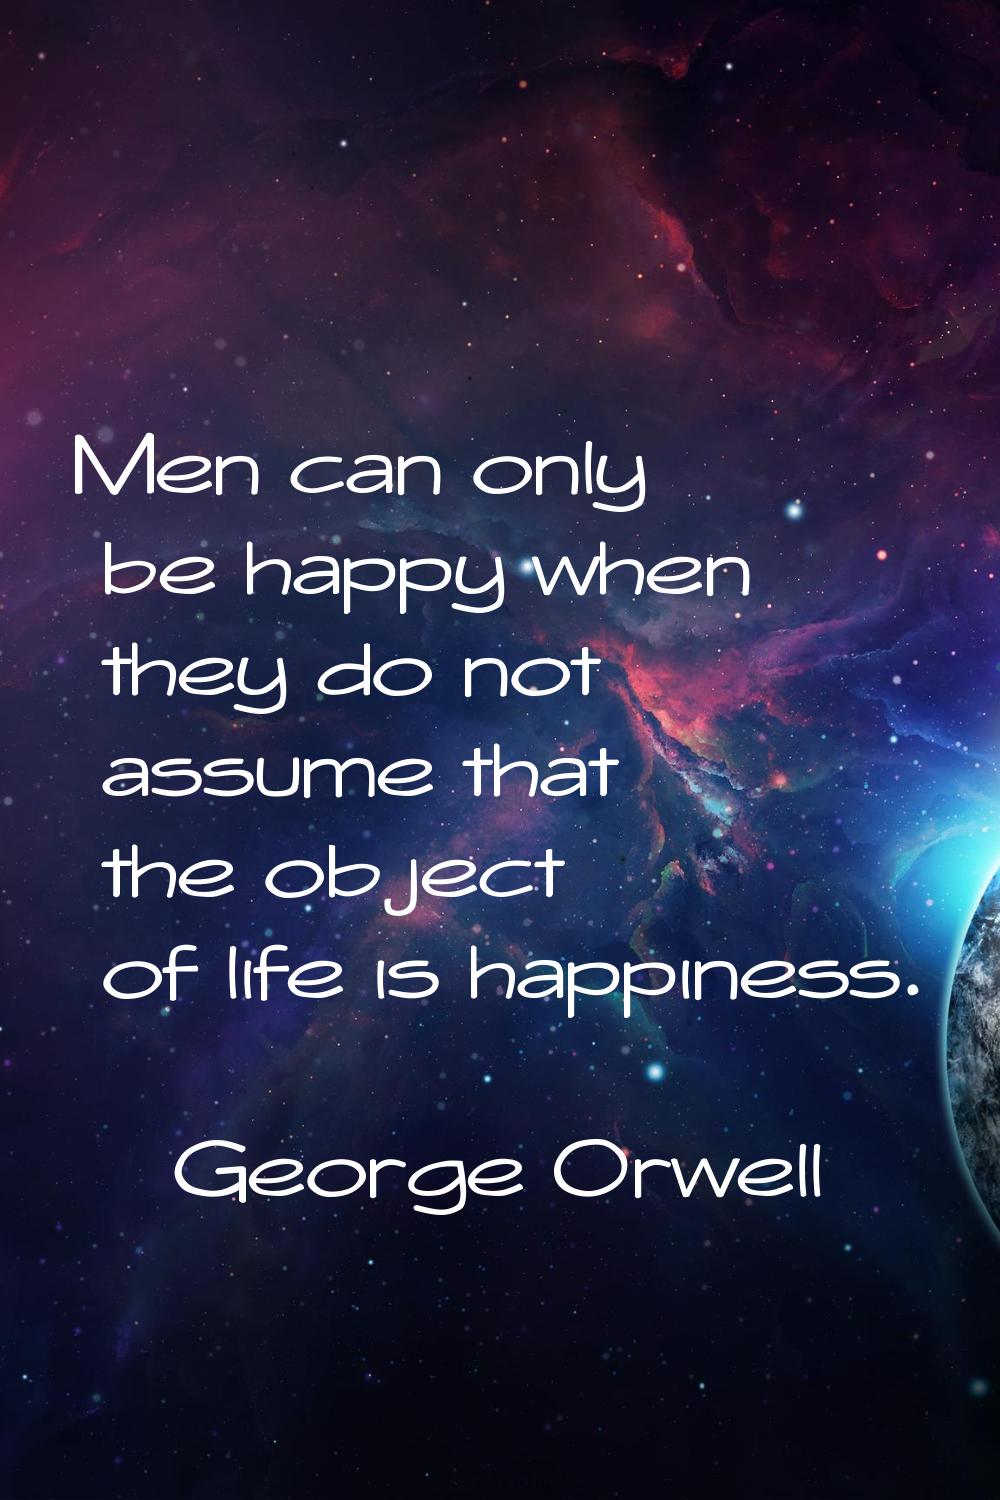 Men can only be happy when they do not assume that the object of life is happiness.